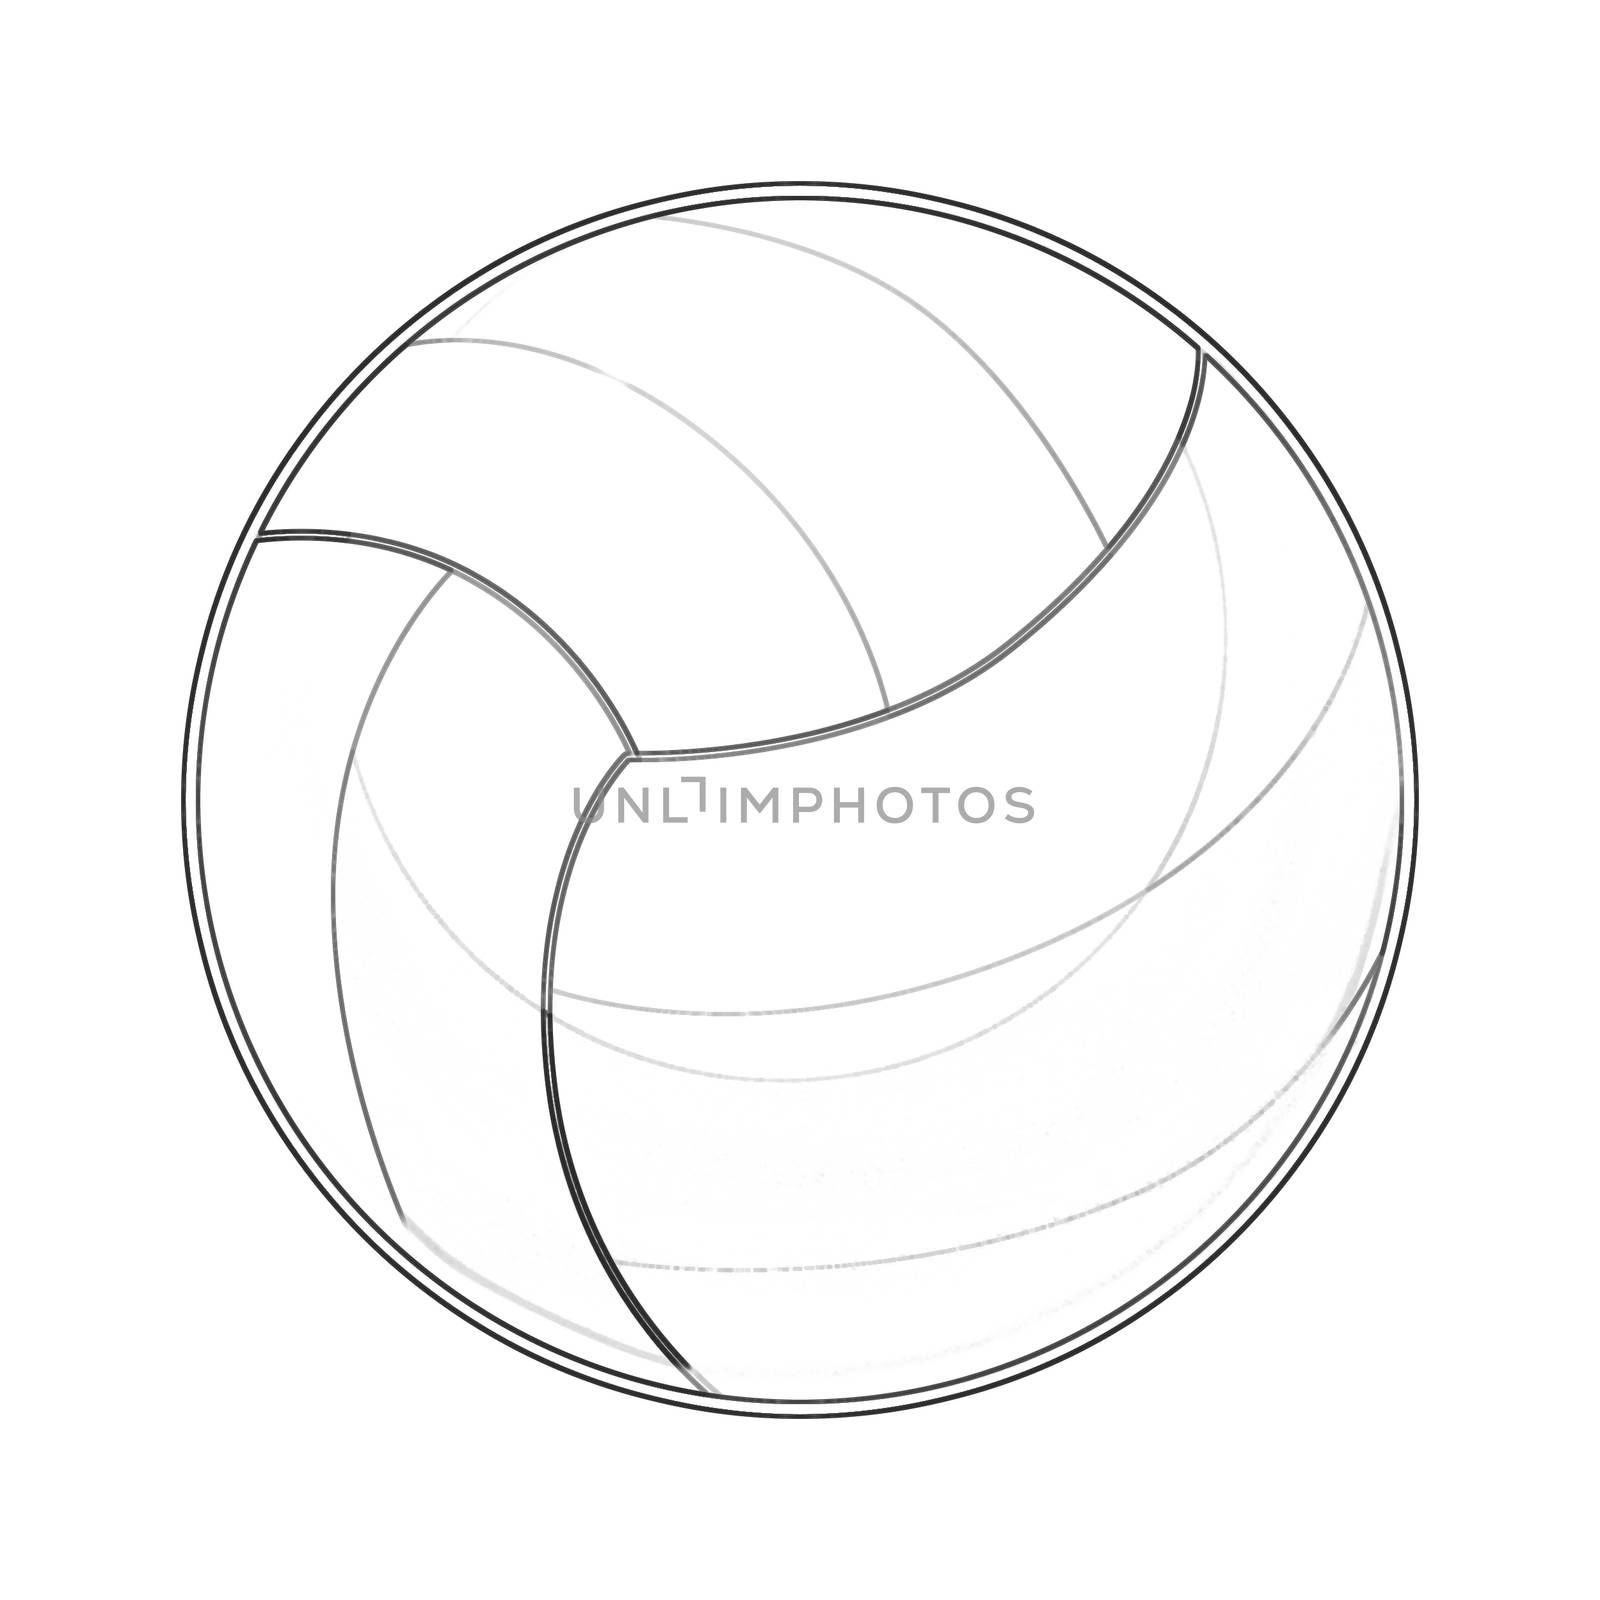 Illustration: Coloring Book Series: Sport Ball: Volleyball. Soft thin line. Print it and bring it to Life with Color! Fantastic Outline / Sketch / Line Art Design.